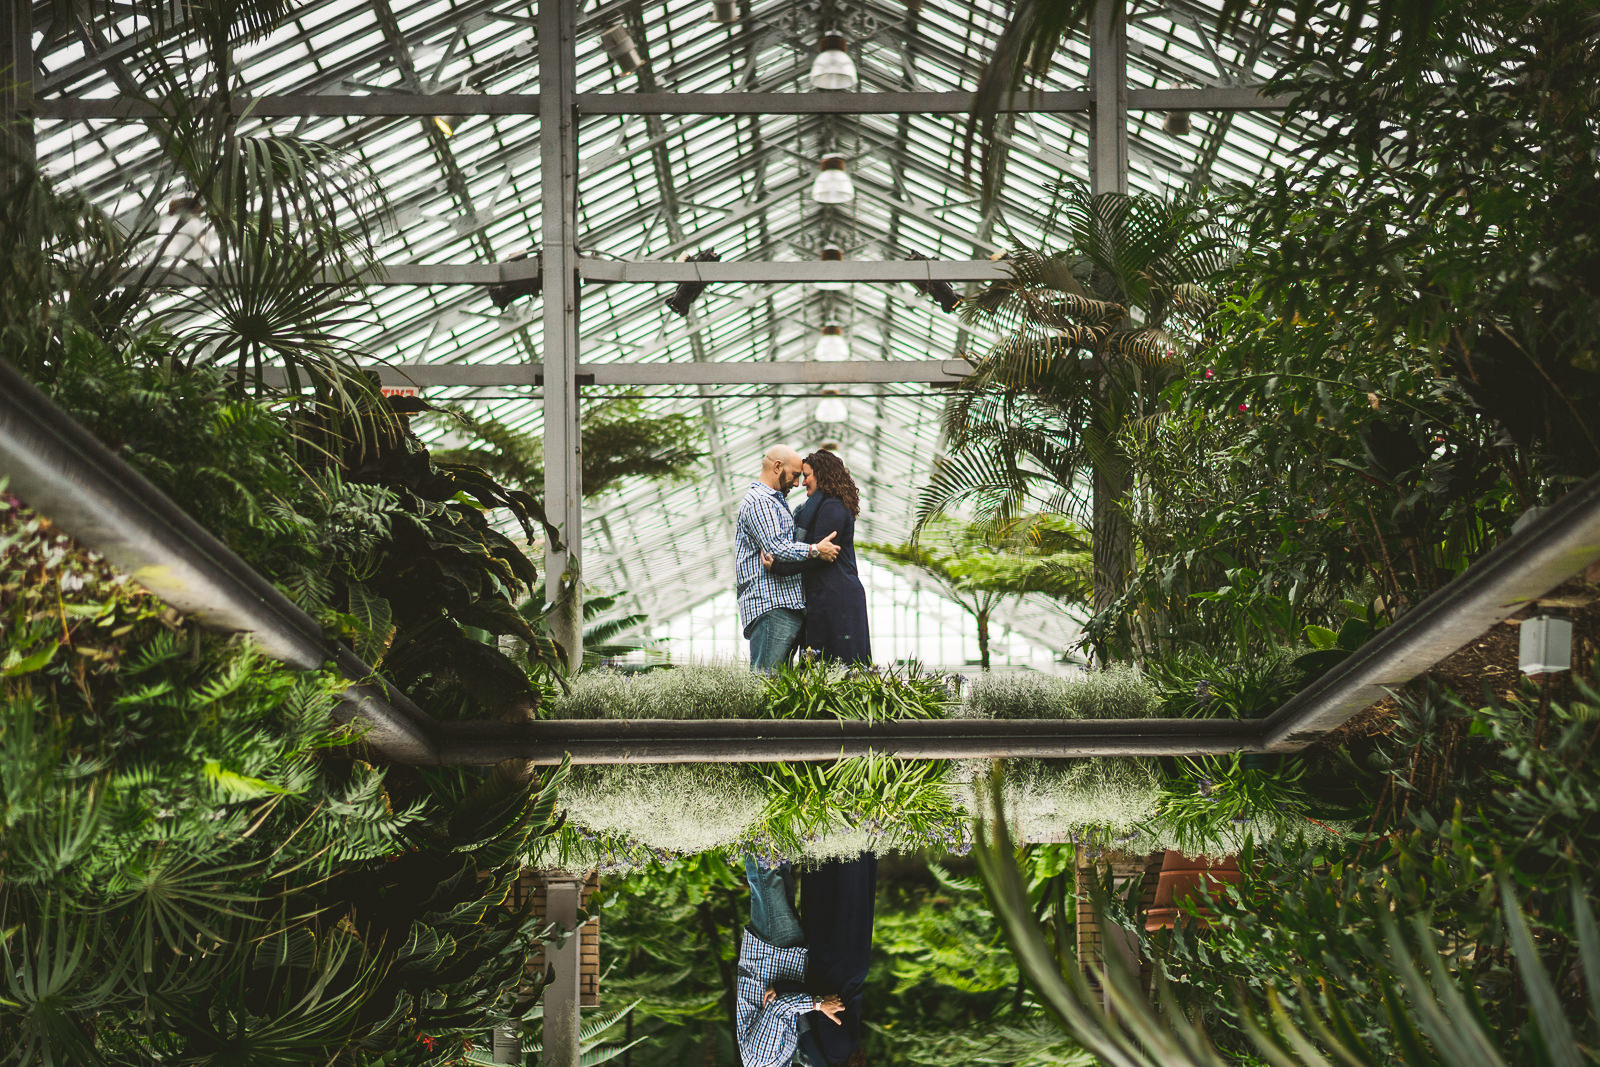 12 upside down reflection at garfield park conservatory